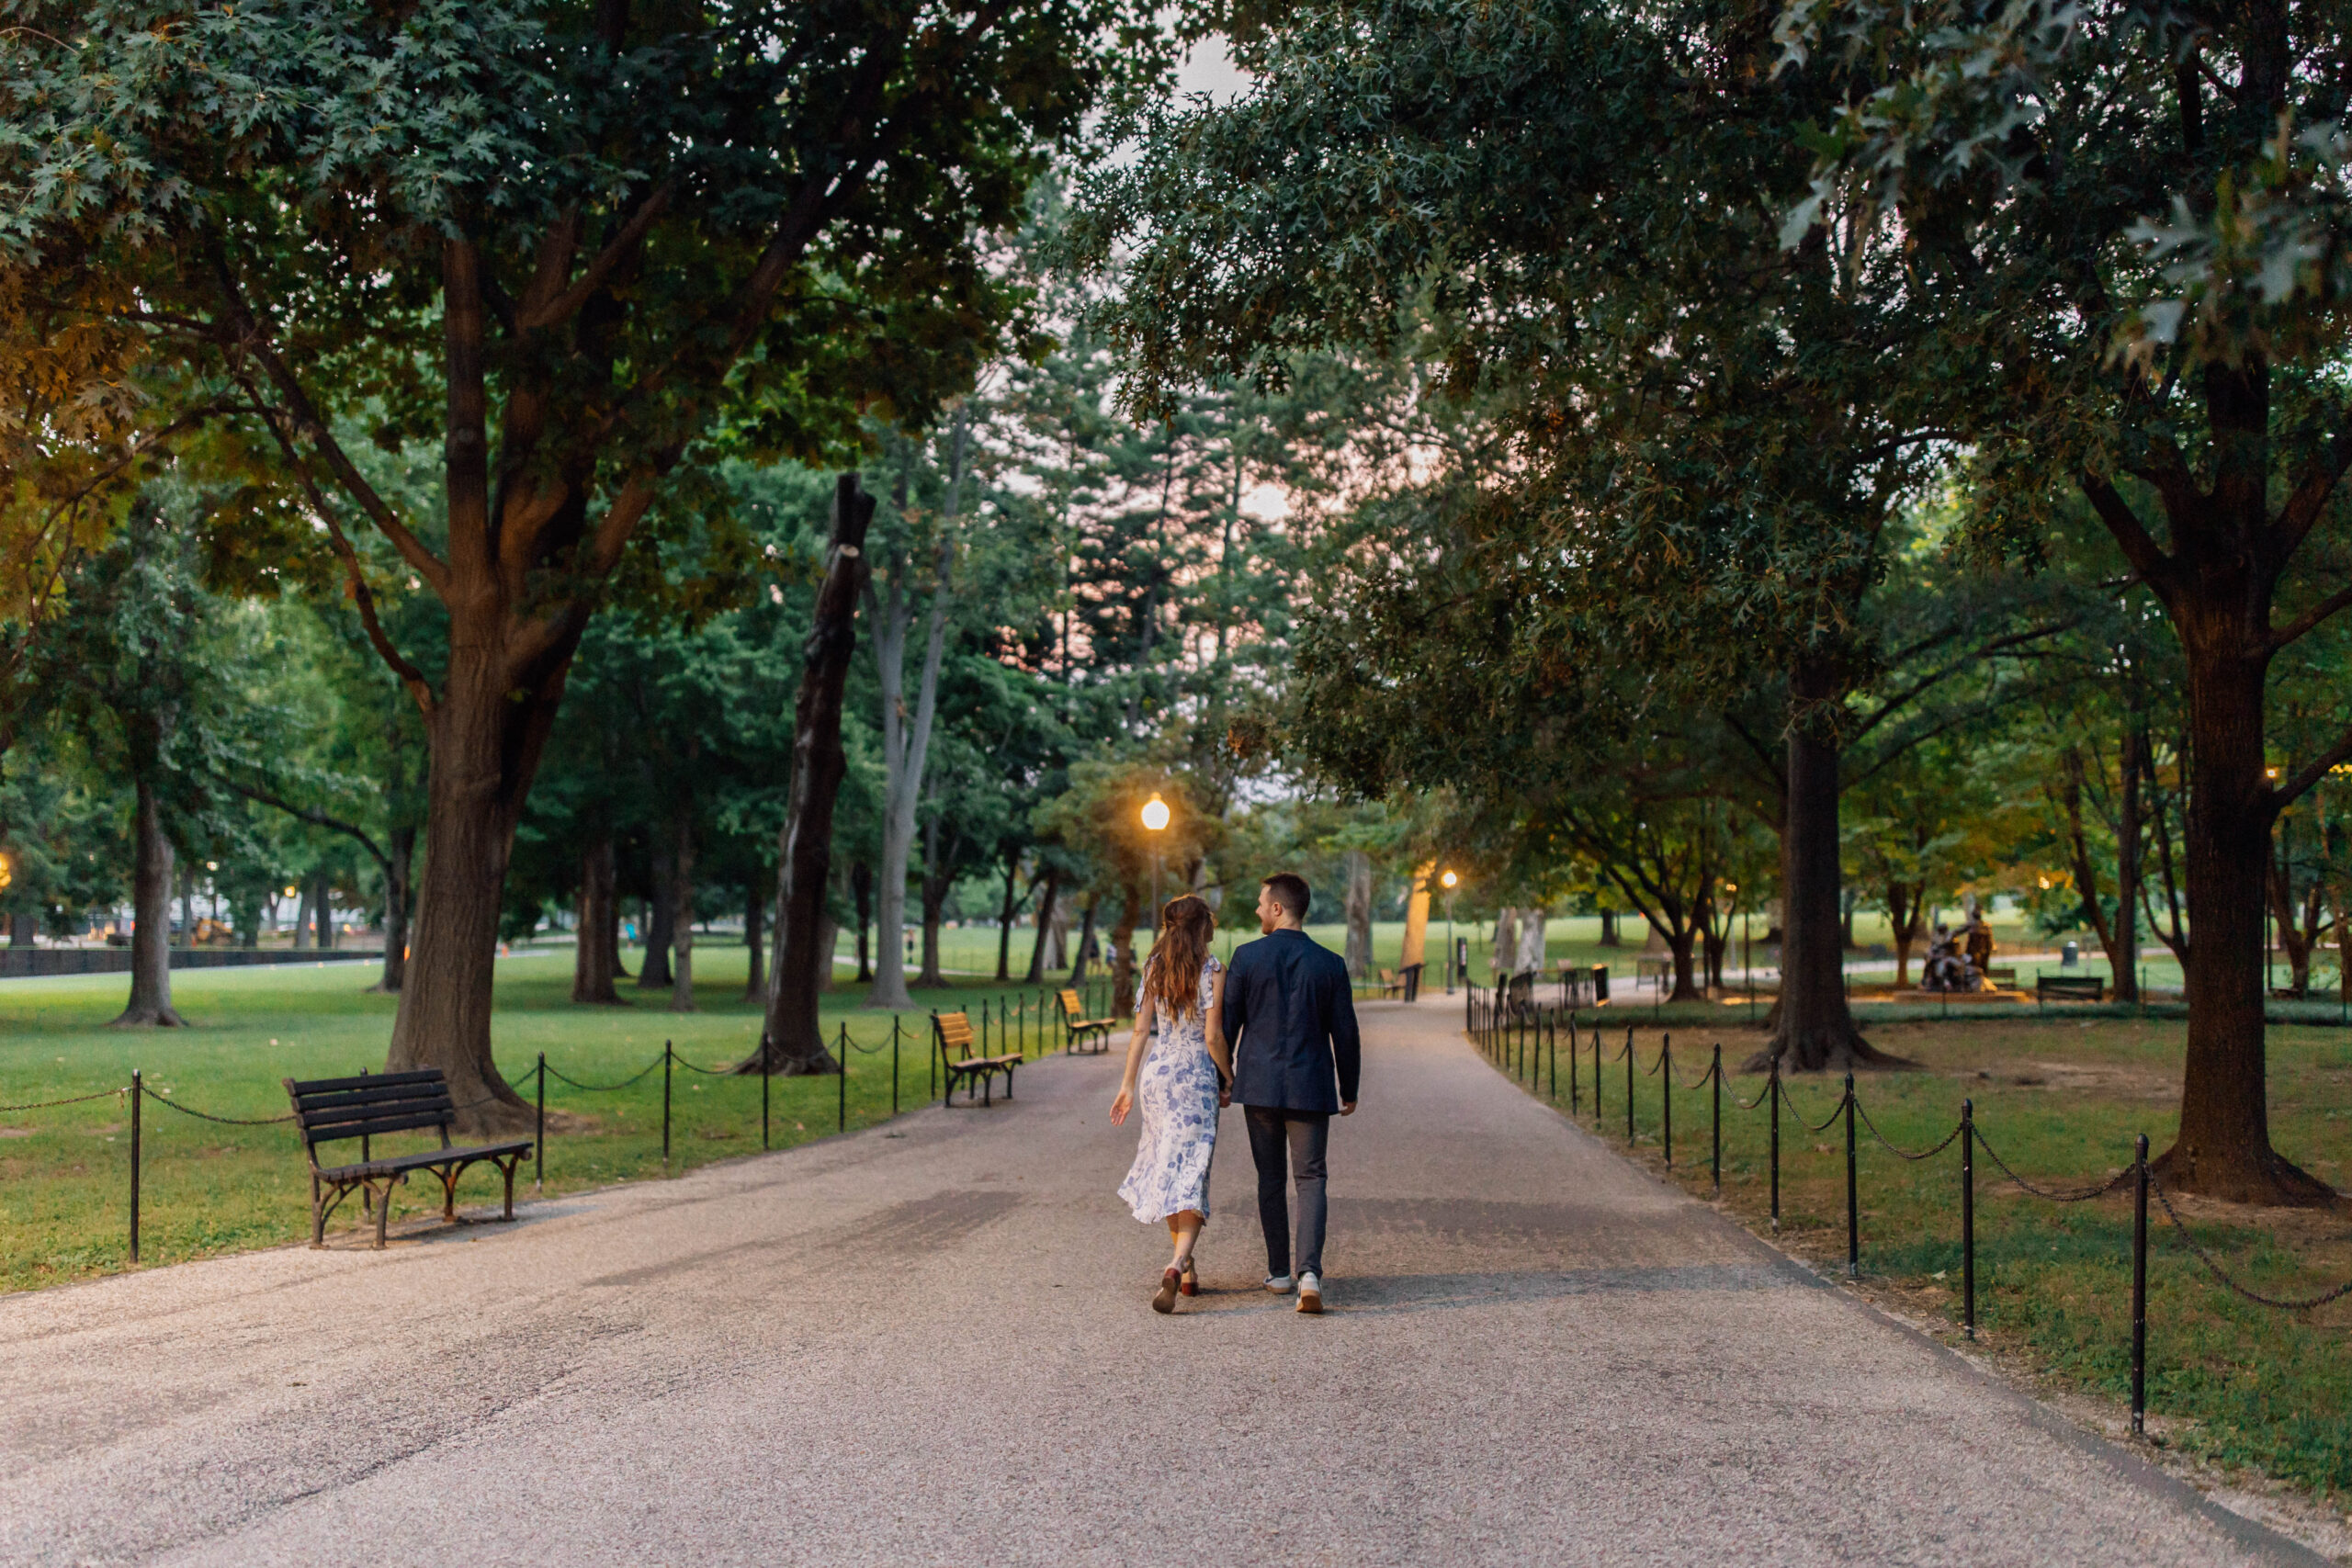 Romantic walk in the park during Washington D.C. Engagement Photo Session at The Lincoln Memorial. True to color, cinematic photography